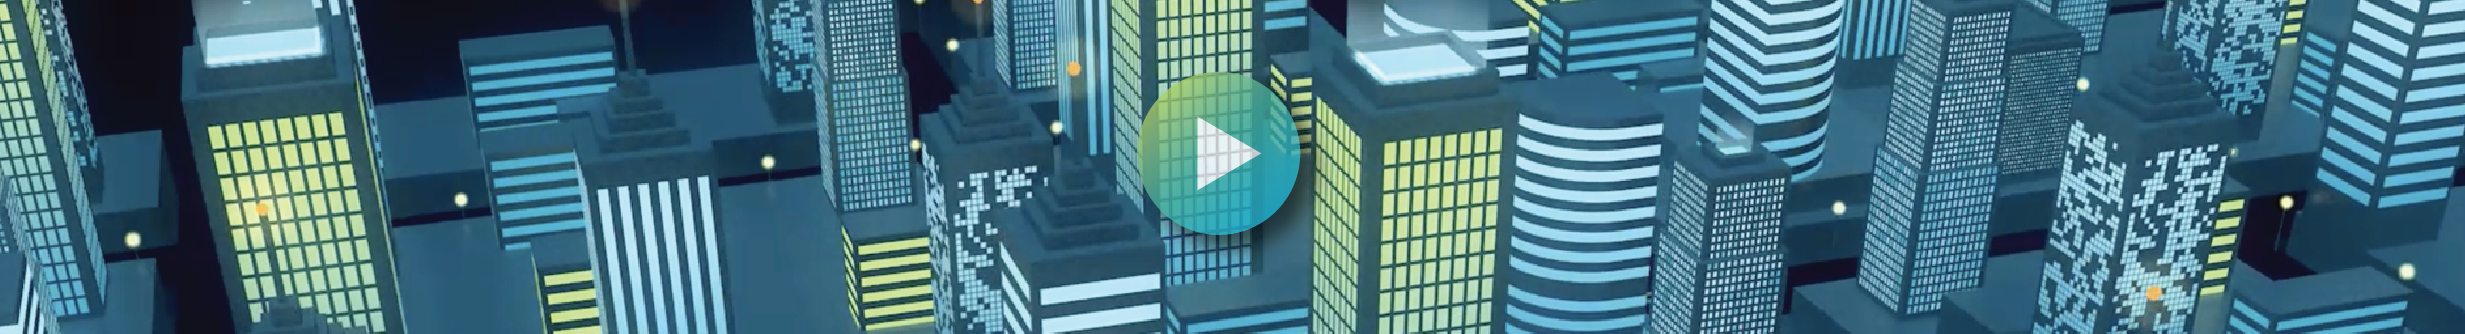 urban digital twin video still image with play button